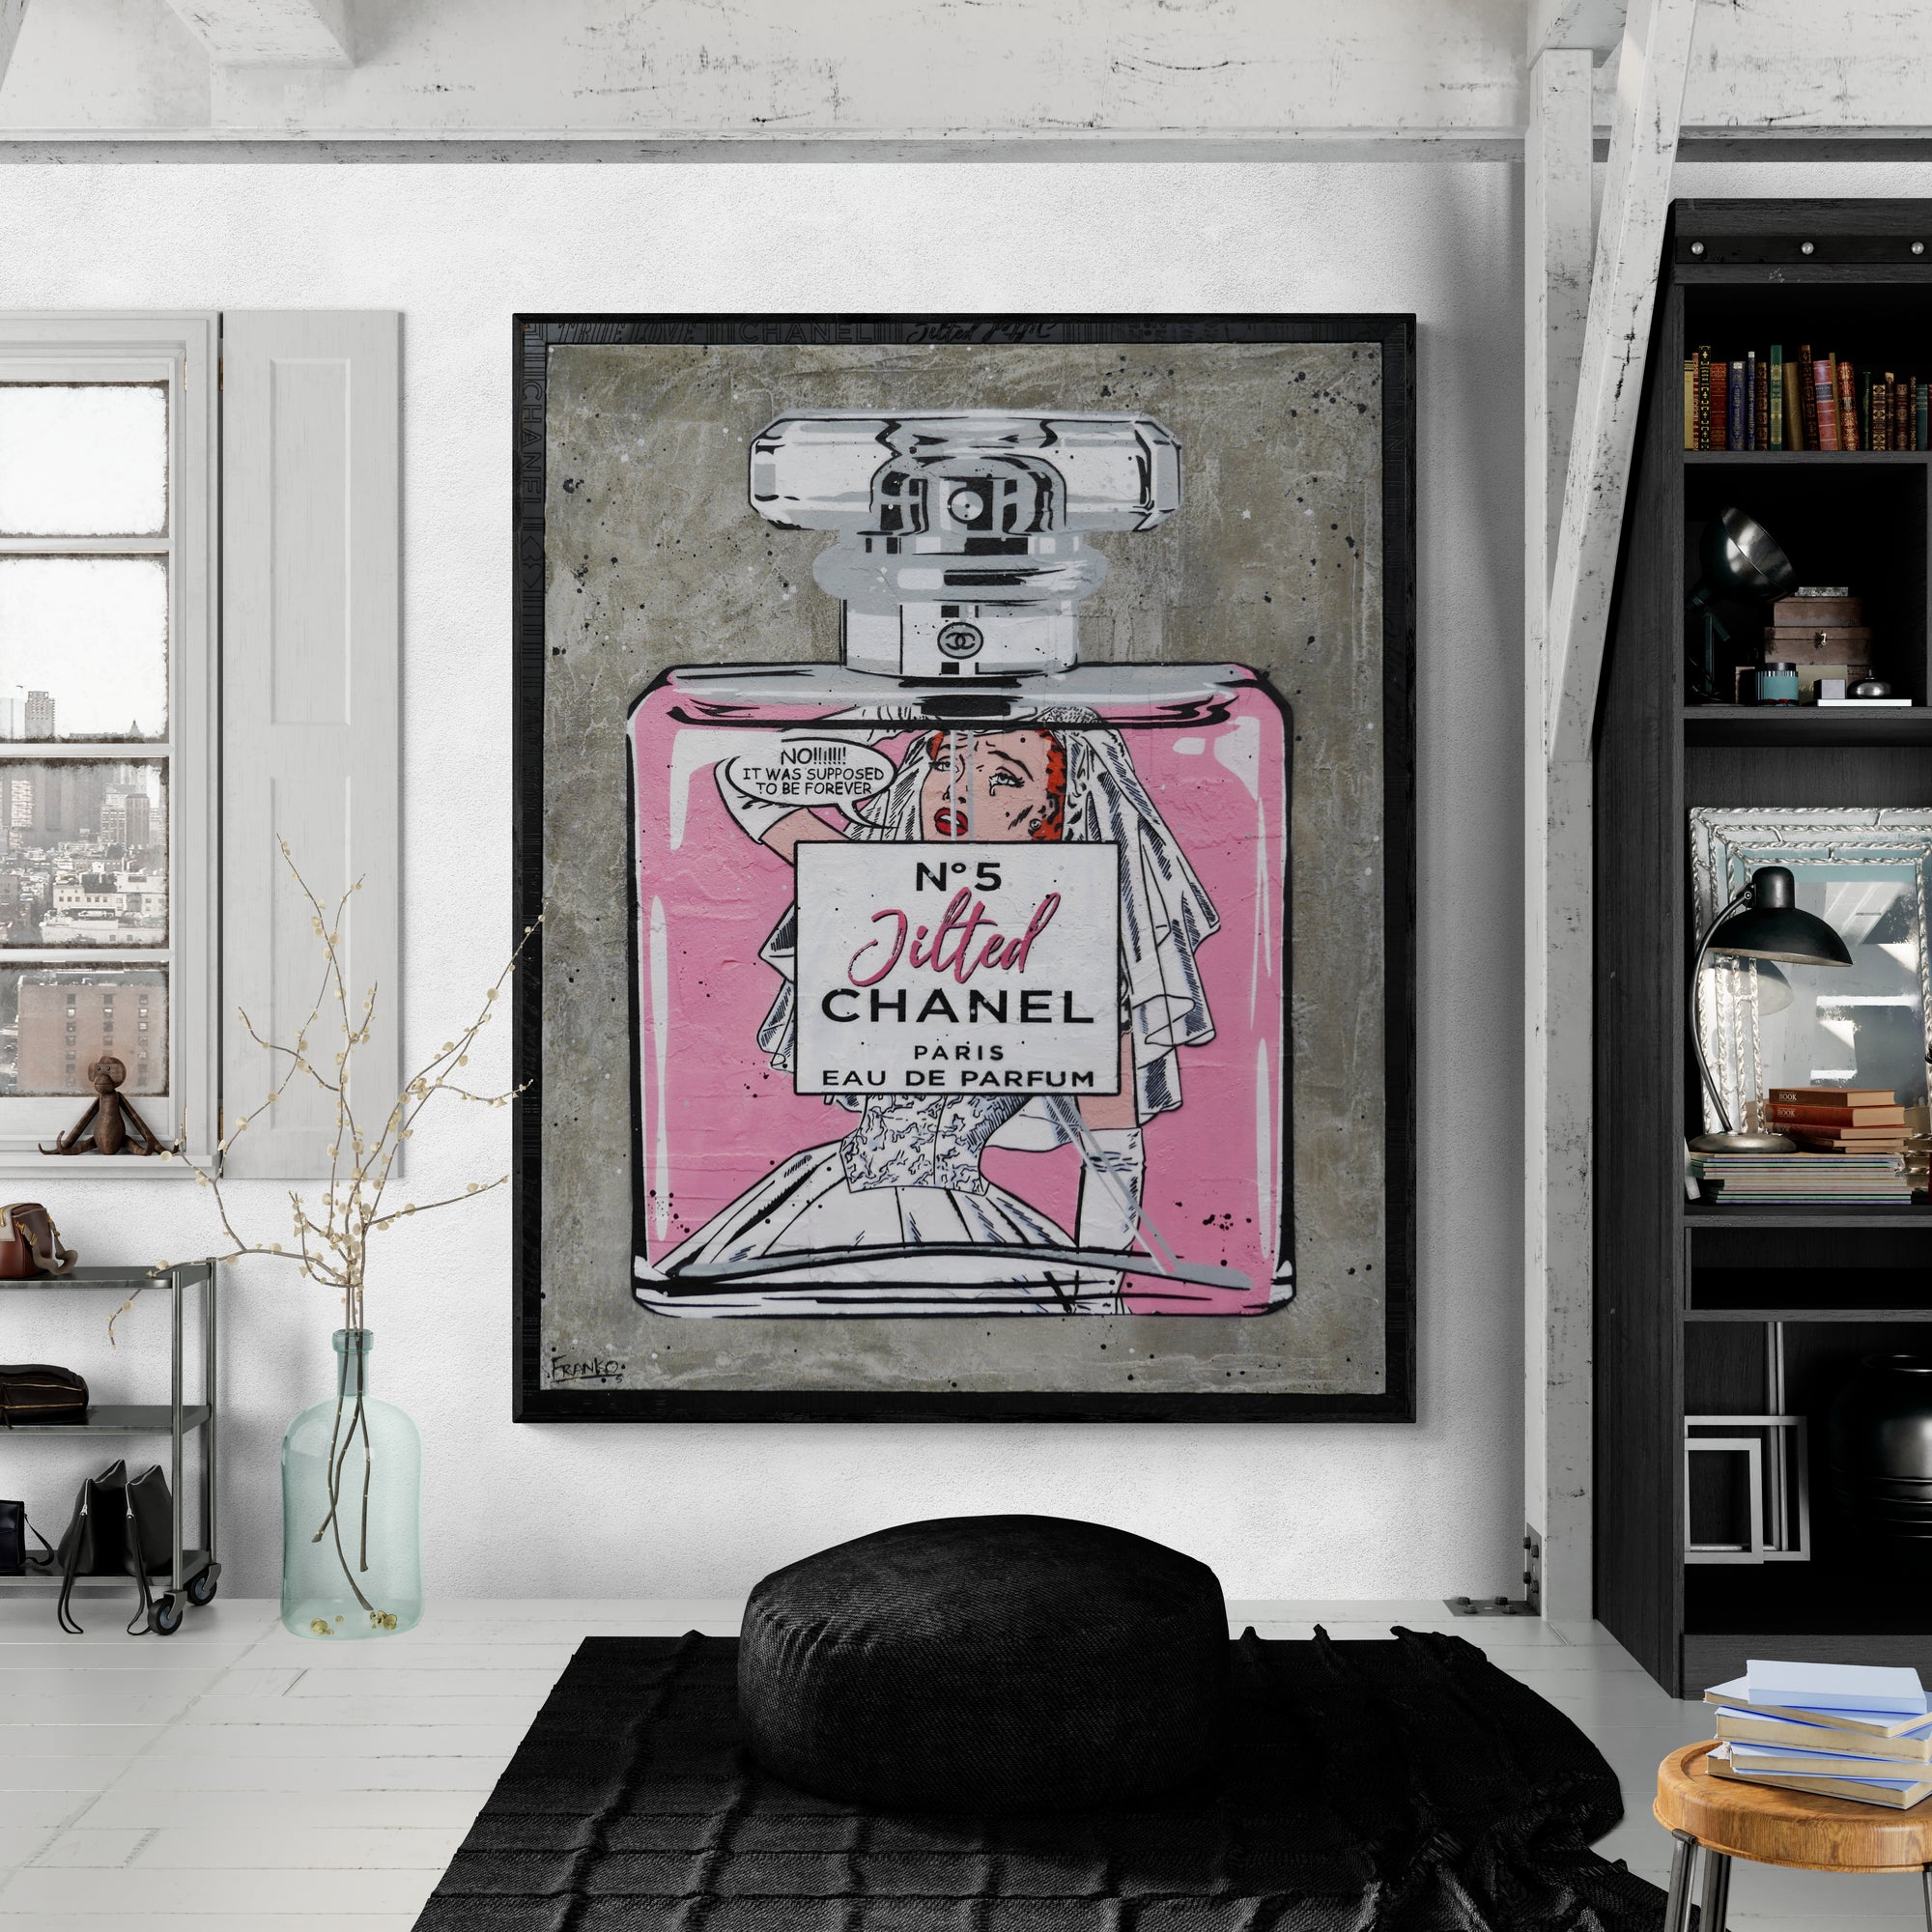 Jilted No.5 120cm x 150cm Industrial Concrete Urban Pop Art Painting With Custom Etched Frame (SOLD)